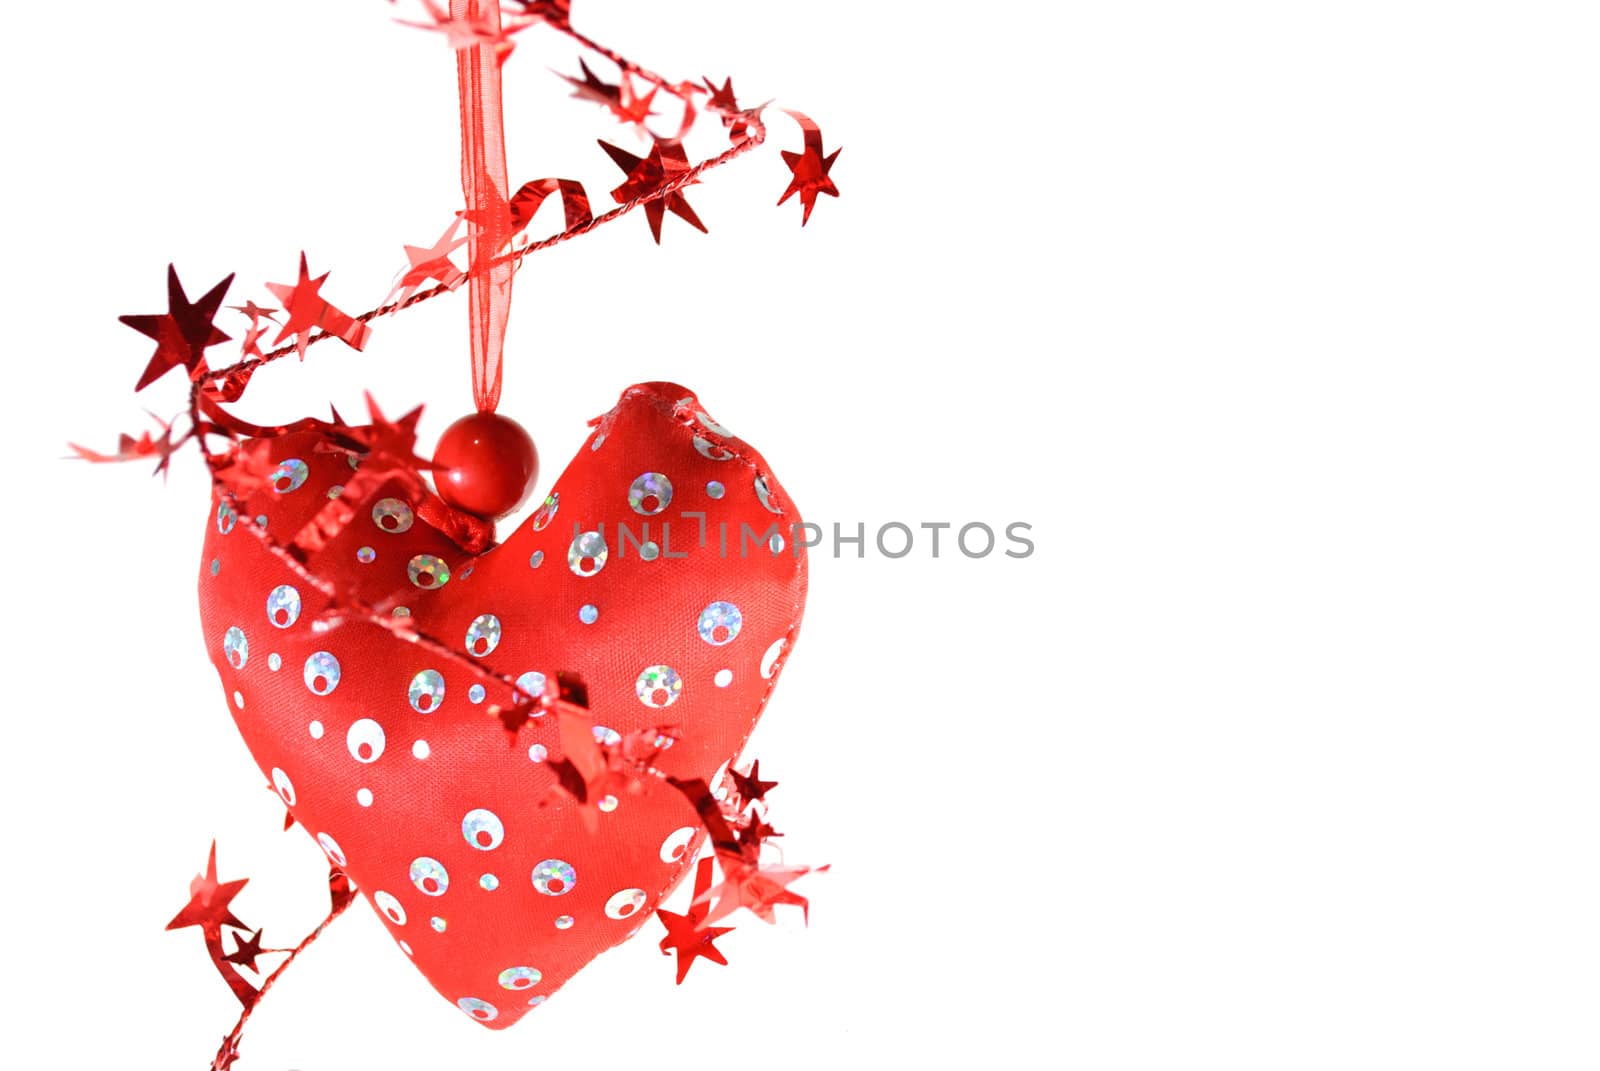 Red heart with red stars on a white background isolated.